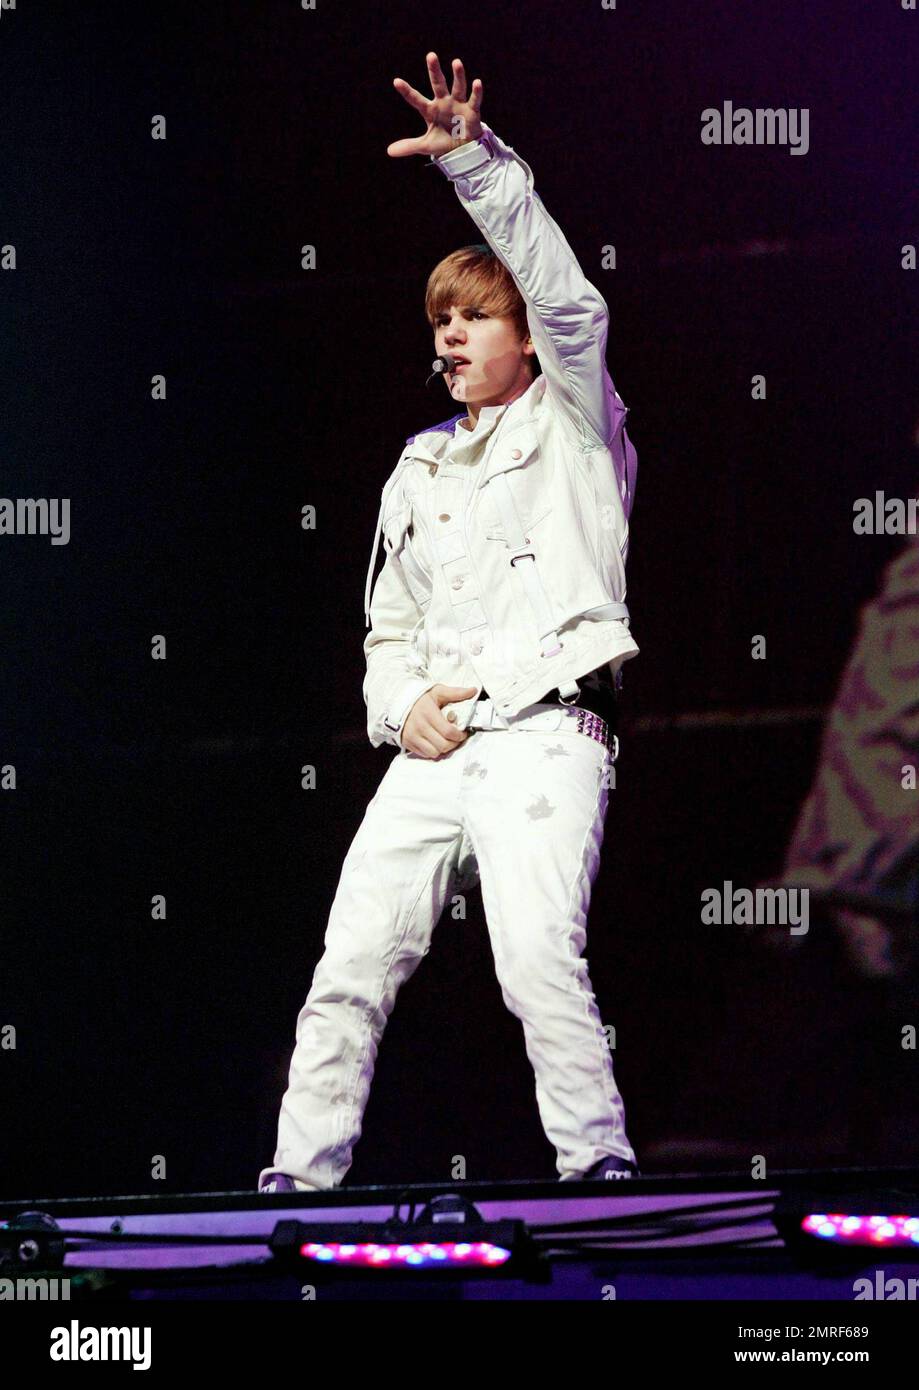 In a white buckle-detailed jacket, trendy paint splattered white jeans and his trademark purple high top sneakers teen heartthrob Justin Bieber performs live in concert at the American Arena. Bieber threw